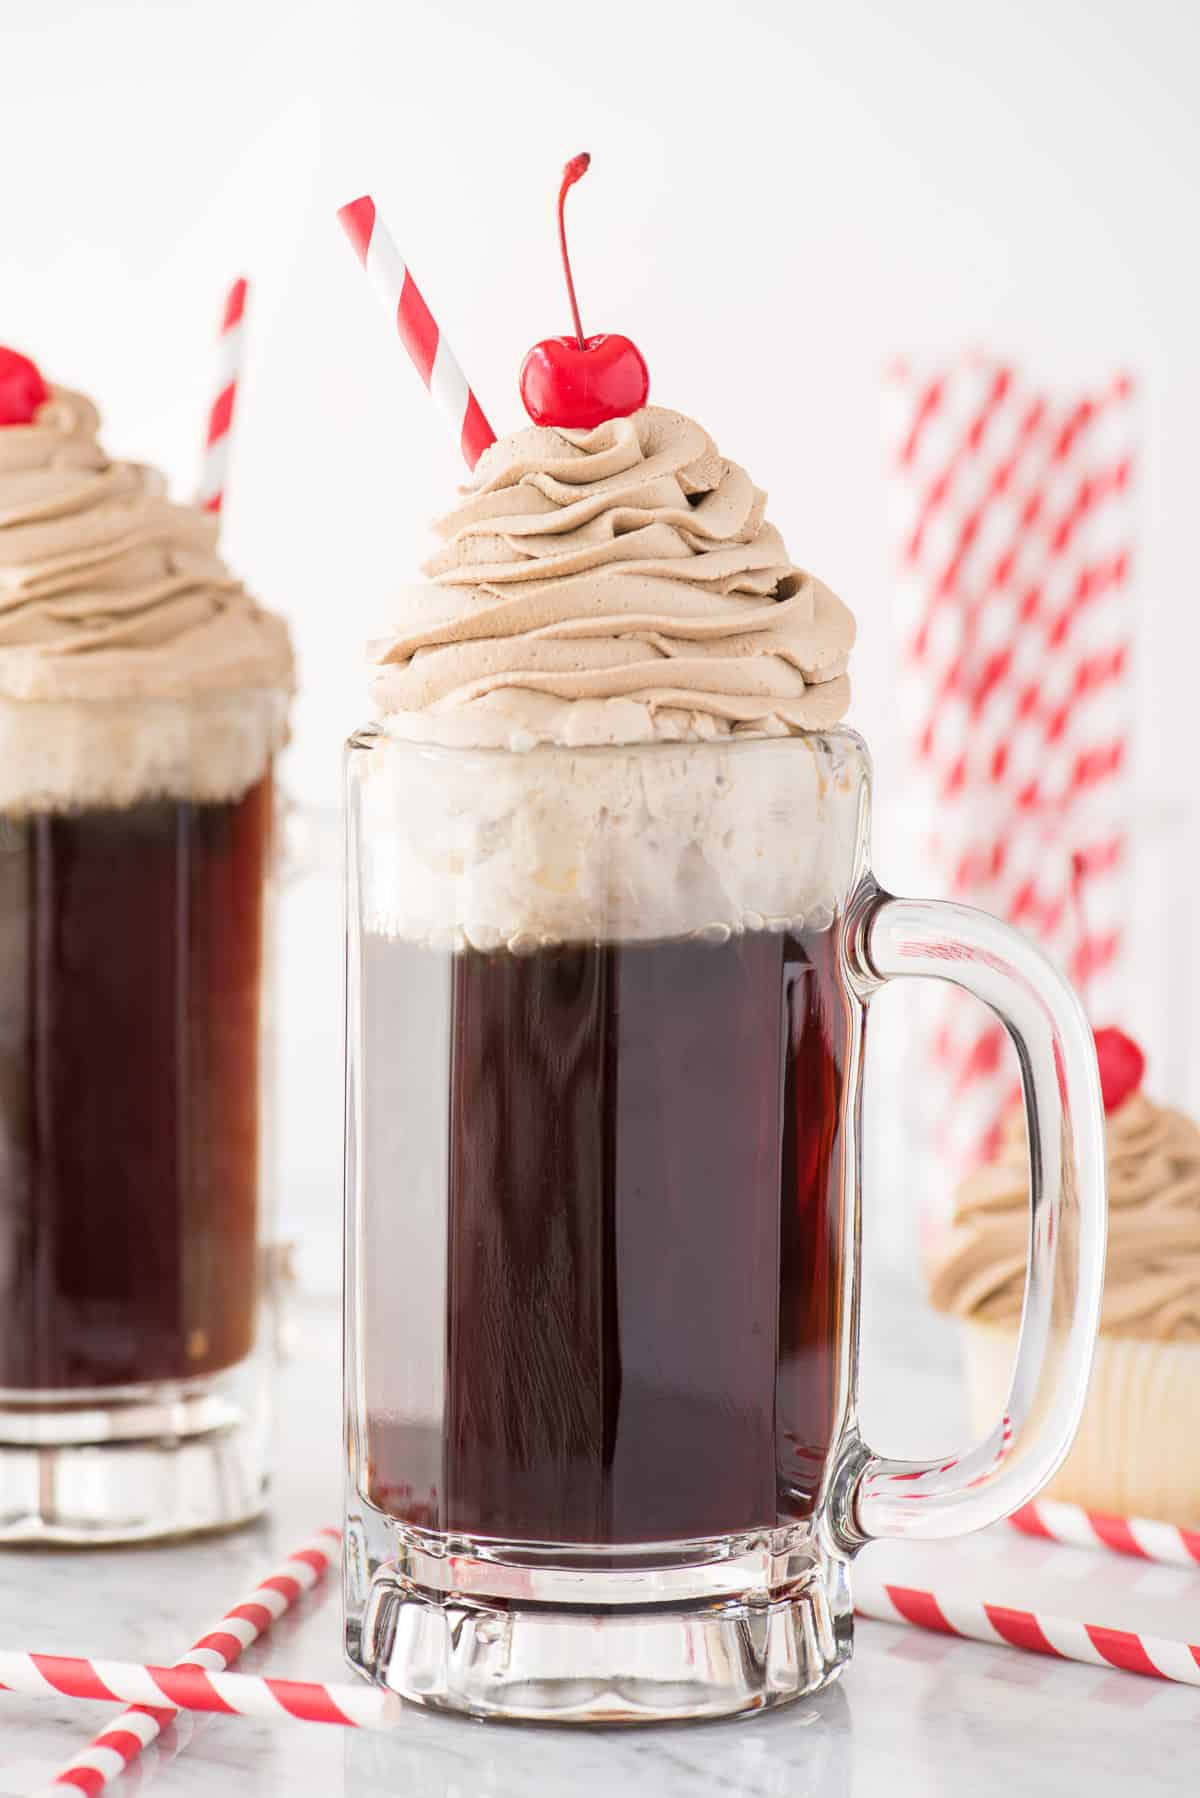 root beer whipped cream piped on top of root beer in a mug with maraschino cherry and red straw